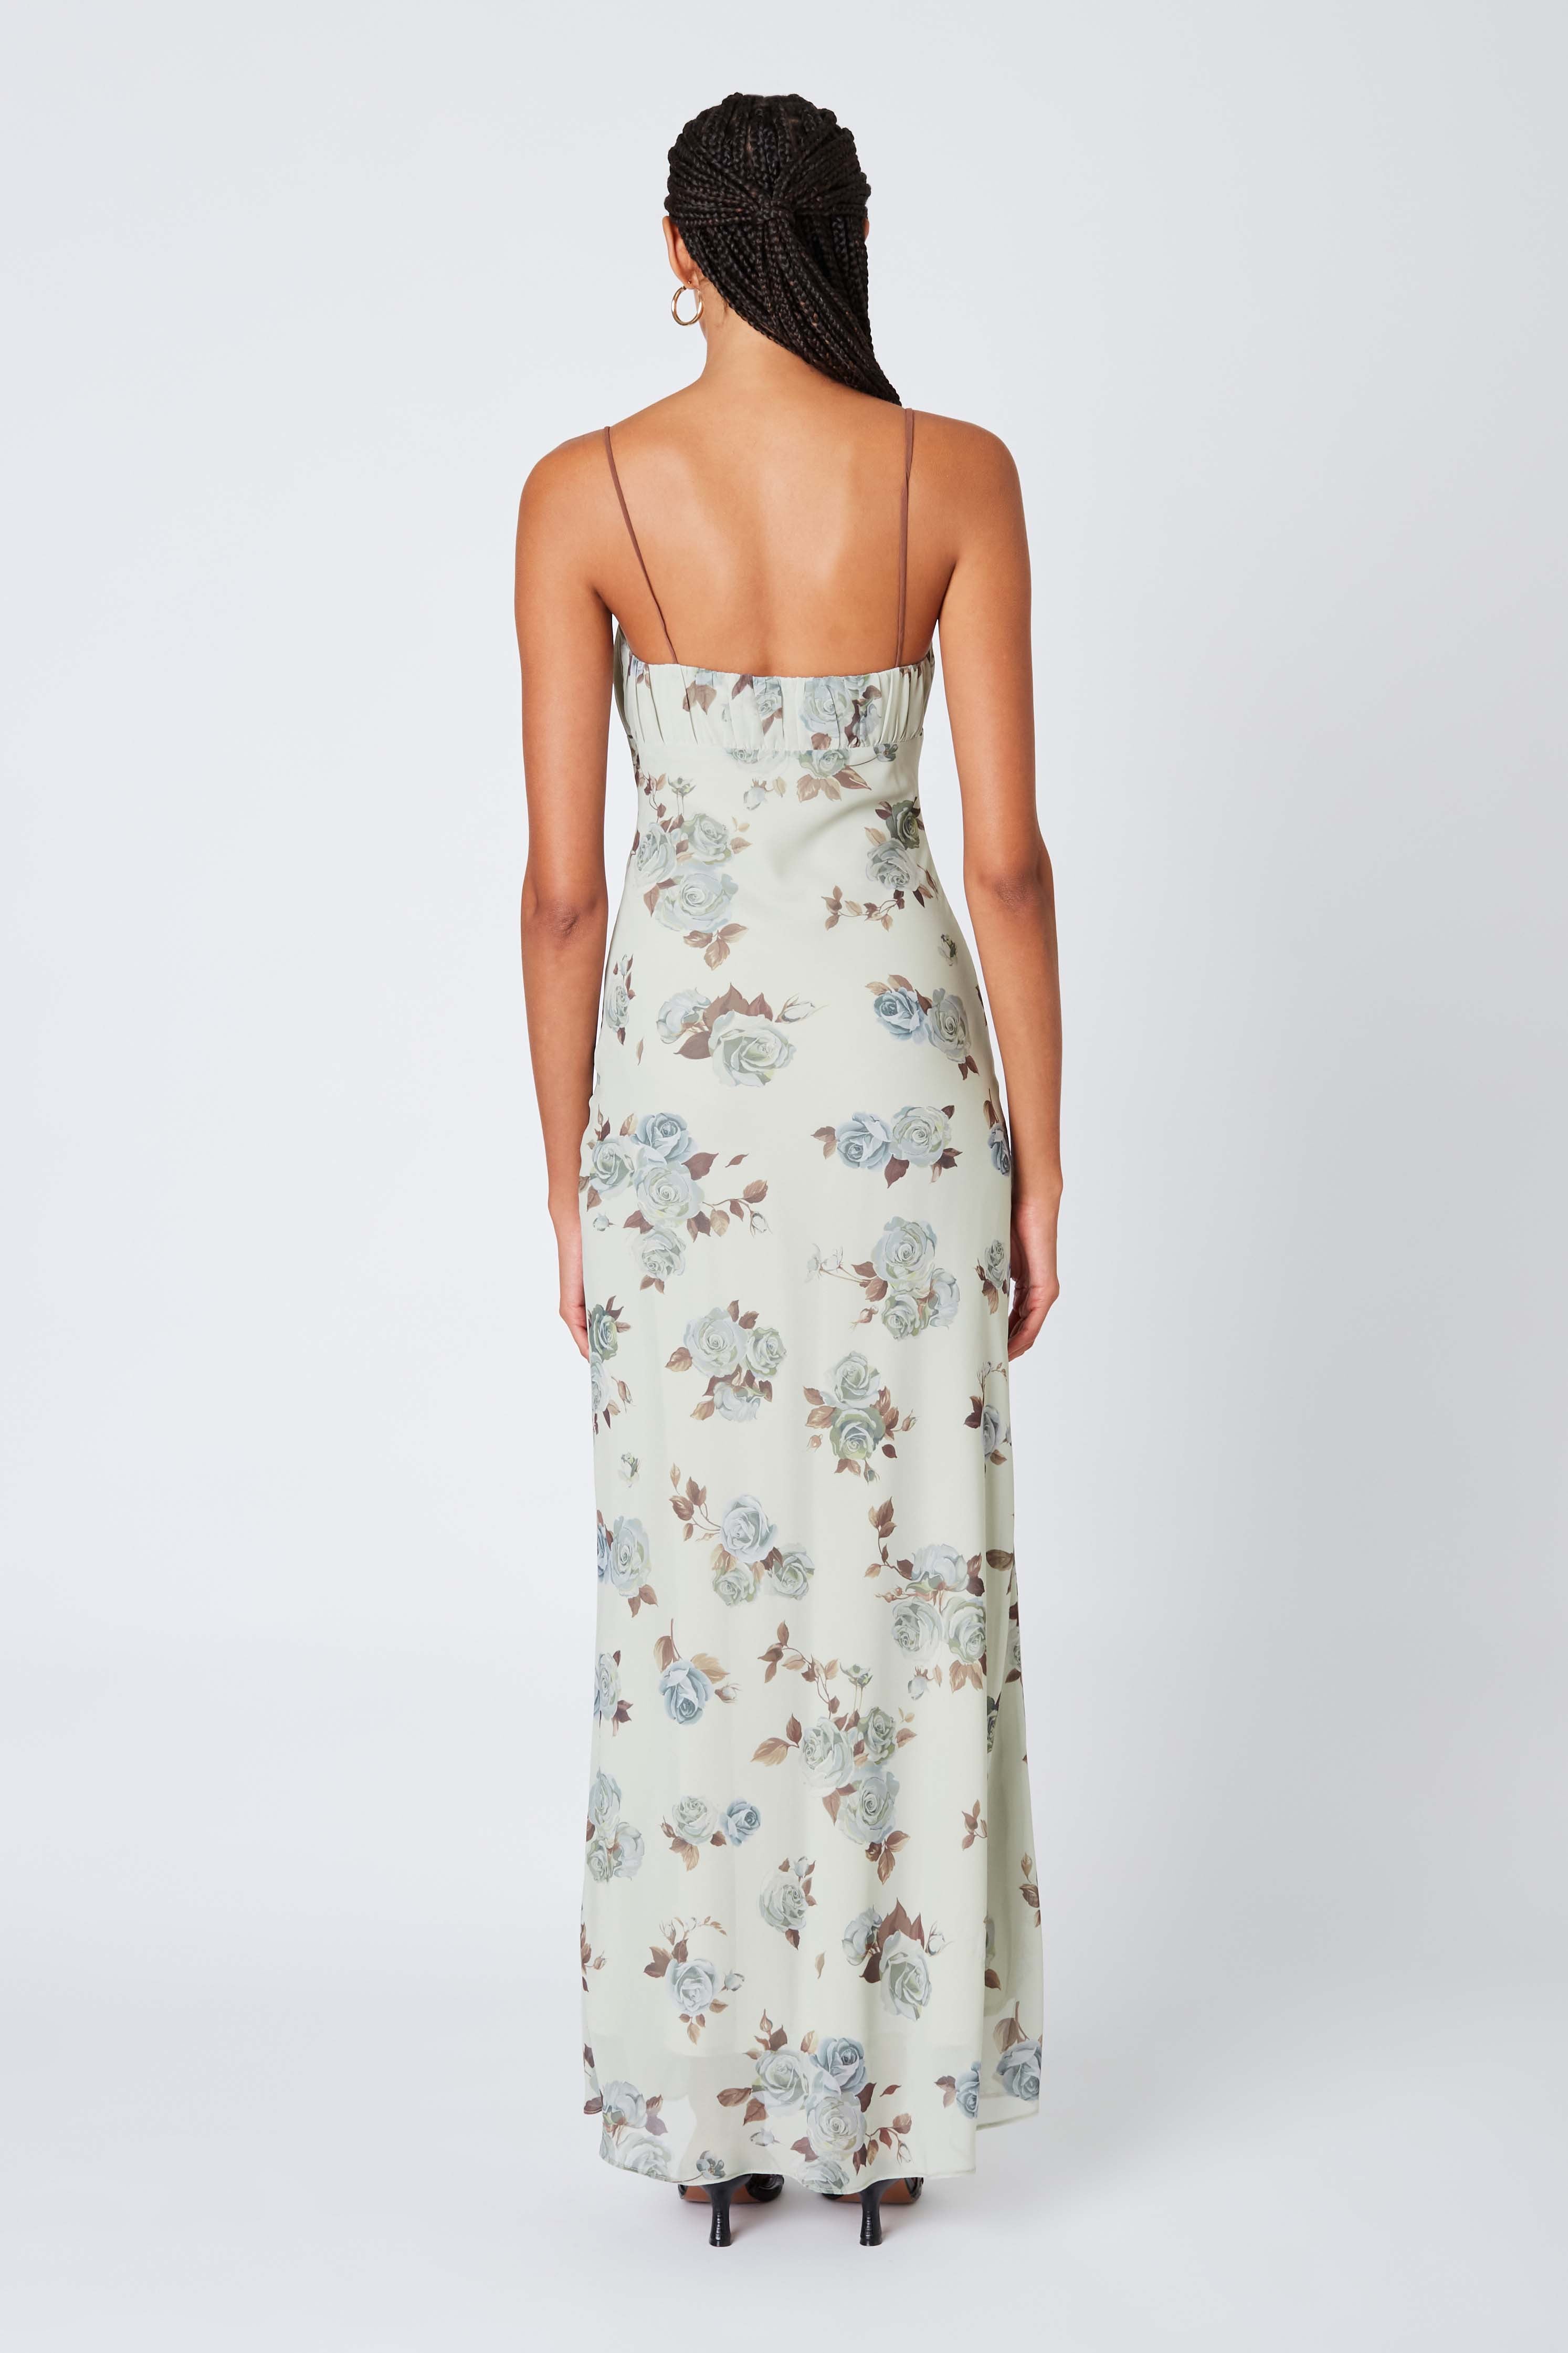 Fern Floral Print Maxi Dress | Collective Request 